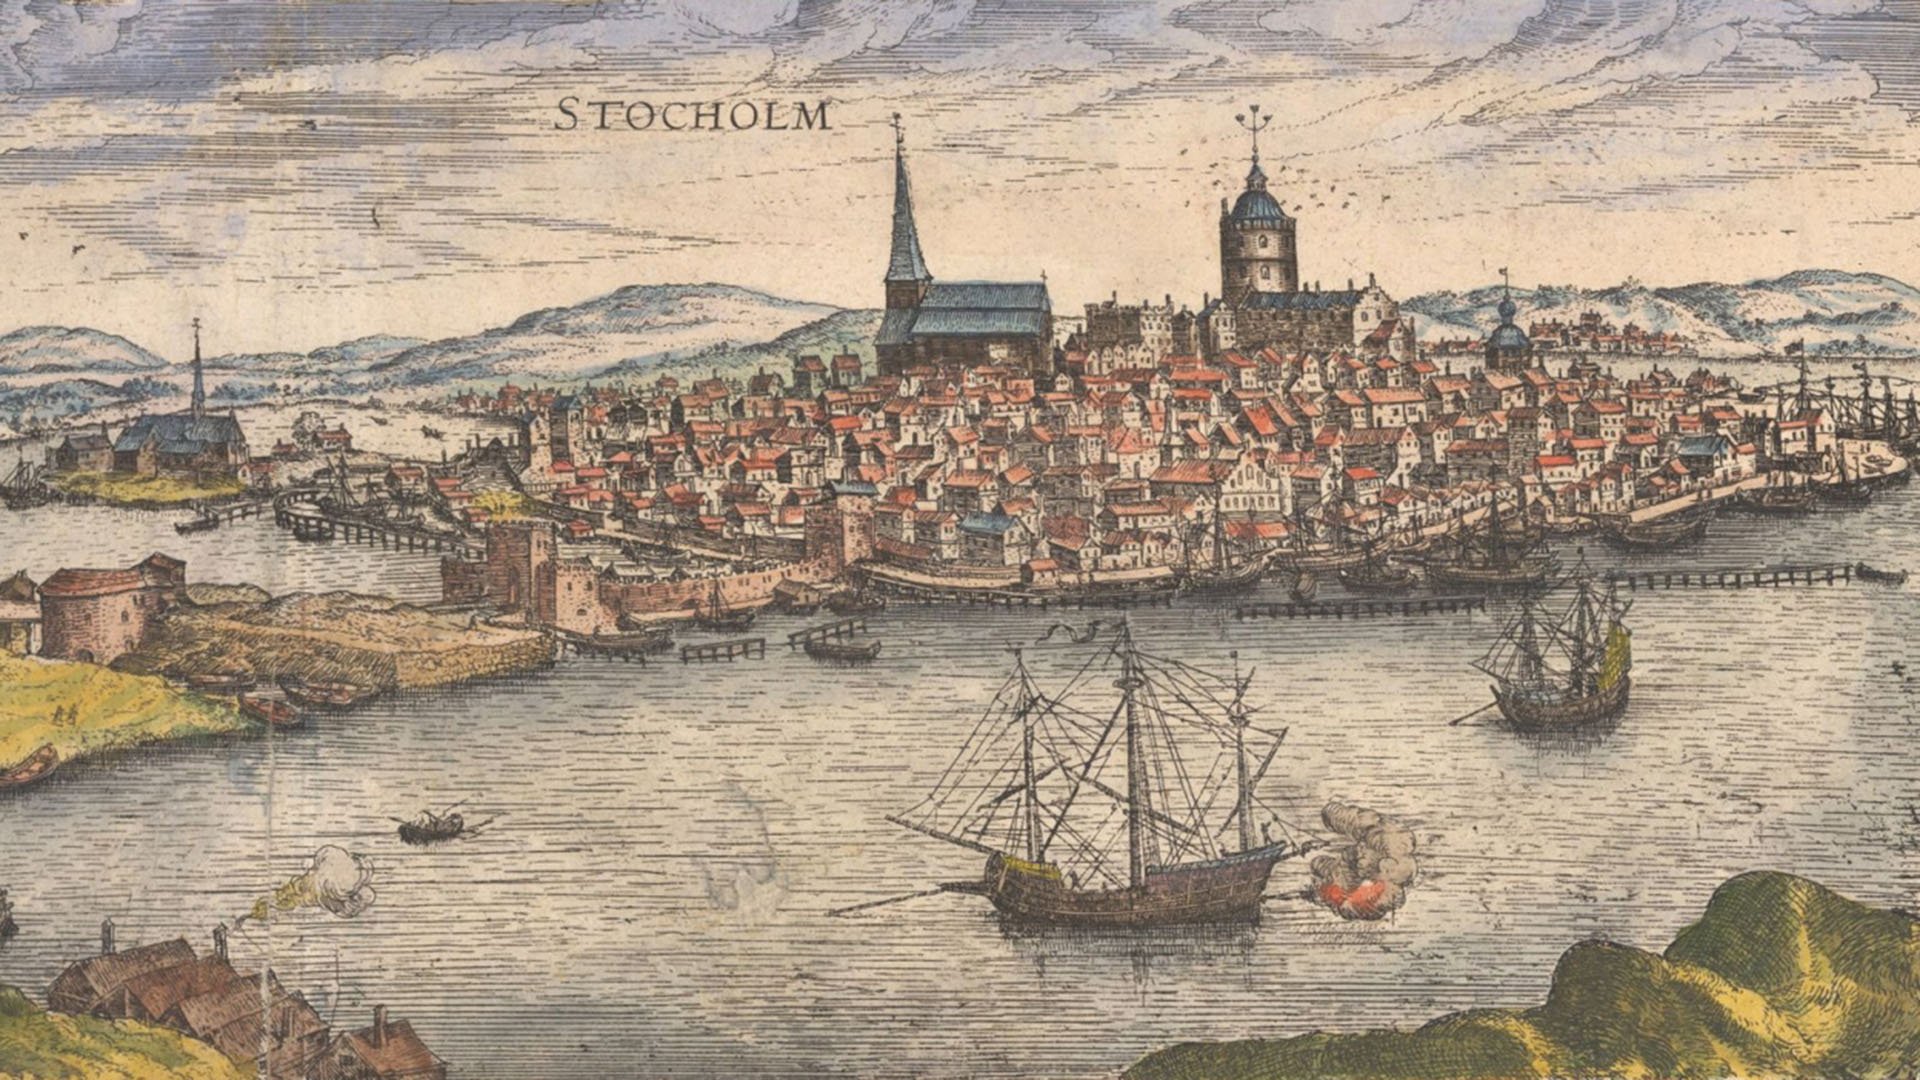  Stockholm as printed in Georg Braun’s “Civitates orbis terrarum” from 1572. Painted by Frans Hogenberg after a sketch by Hieronymus Scholeus. This is the southeastern shore of the modern Old Town. Slussen is visible as the bridge and gates to the le